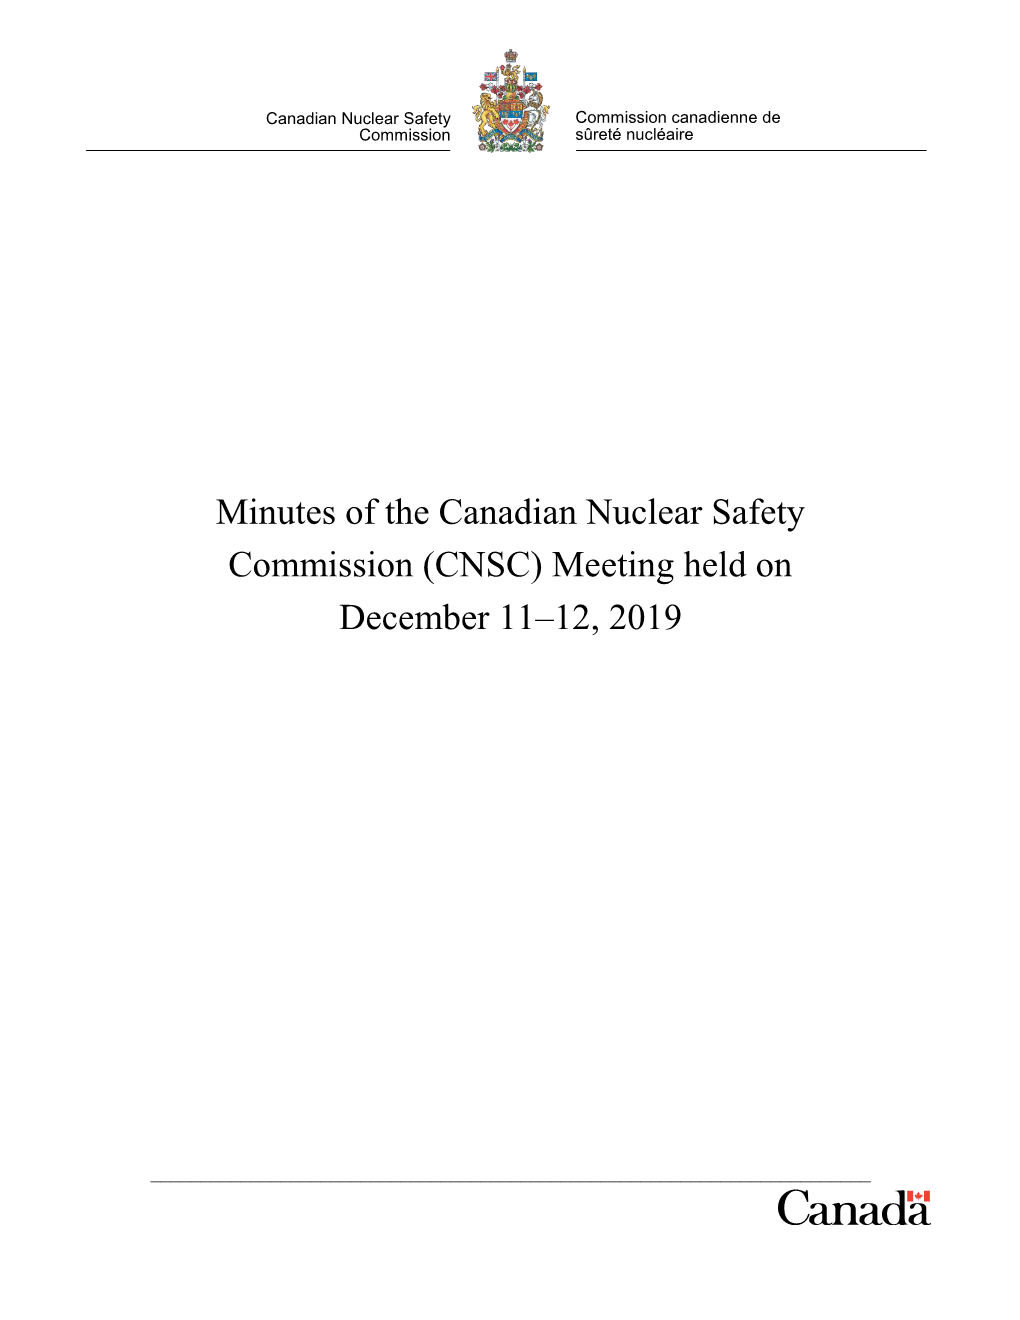 Minutes of the Canadian Nuclear Safety Commission (CNSC) Meeting Held on December 11–12, 2019